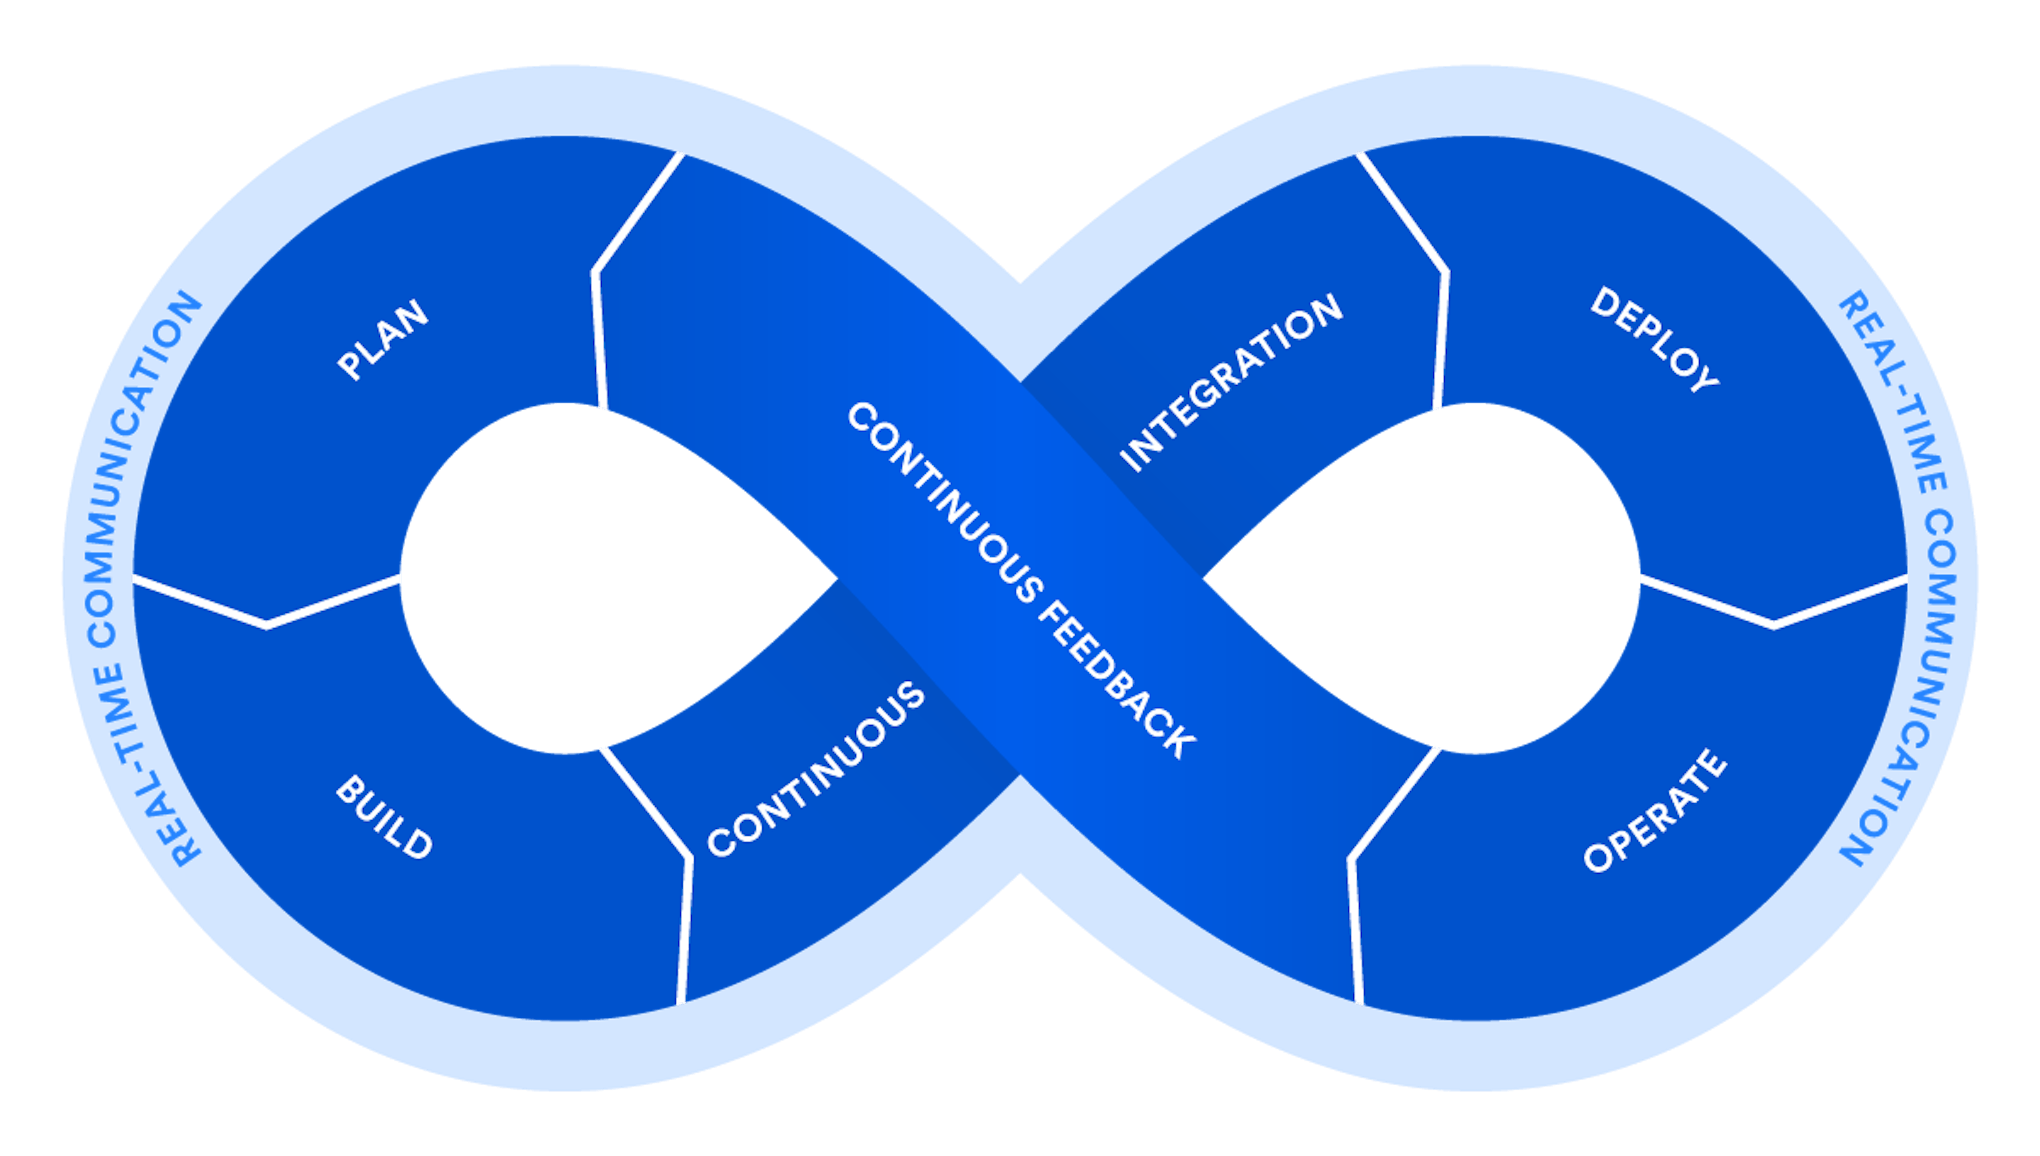 The Principles of DevOps Voiced by Atlassian.